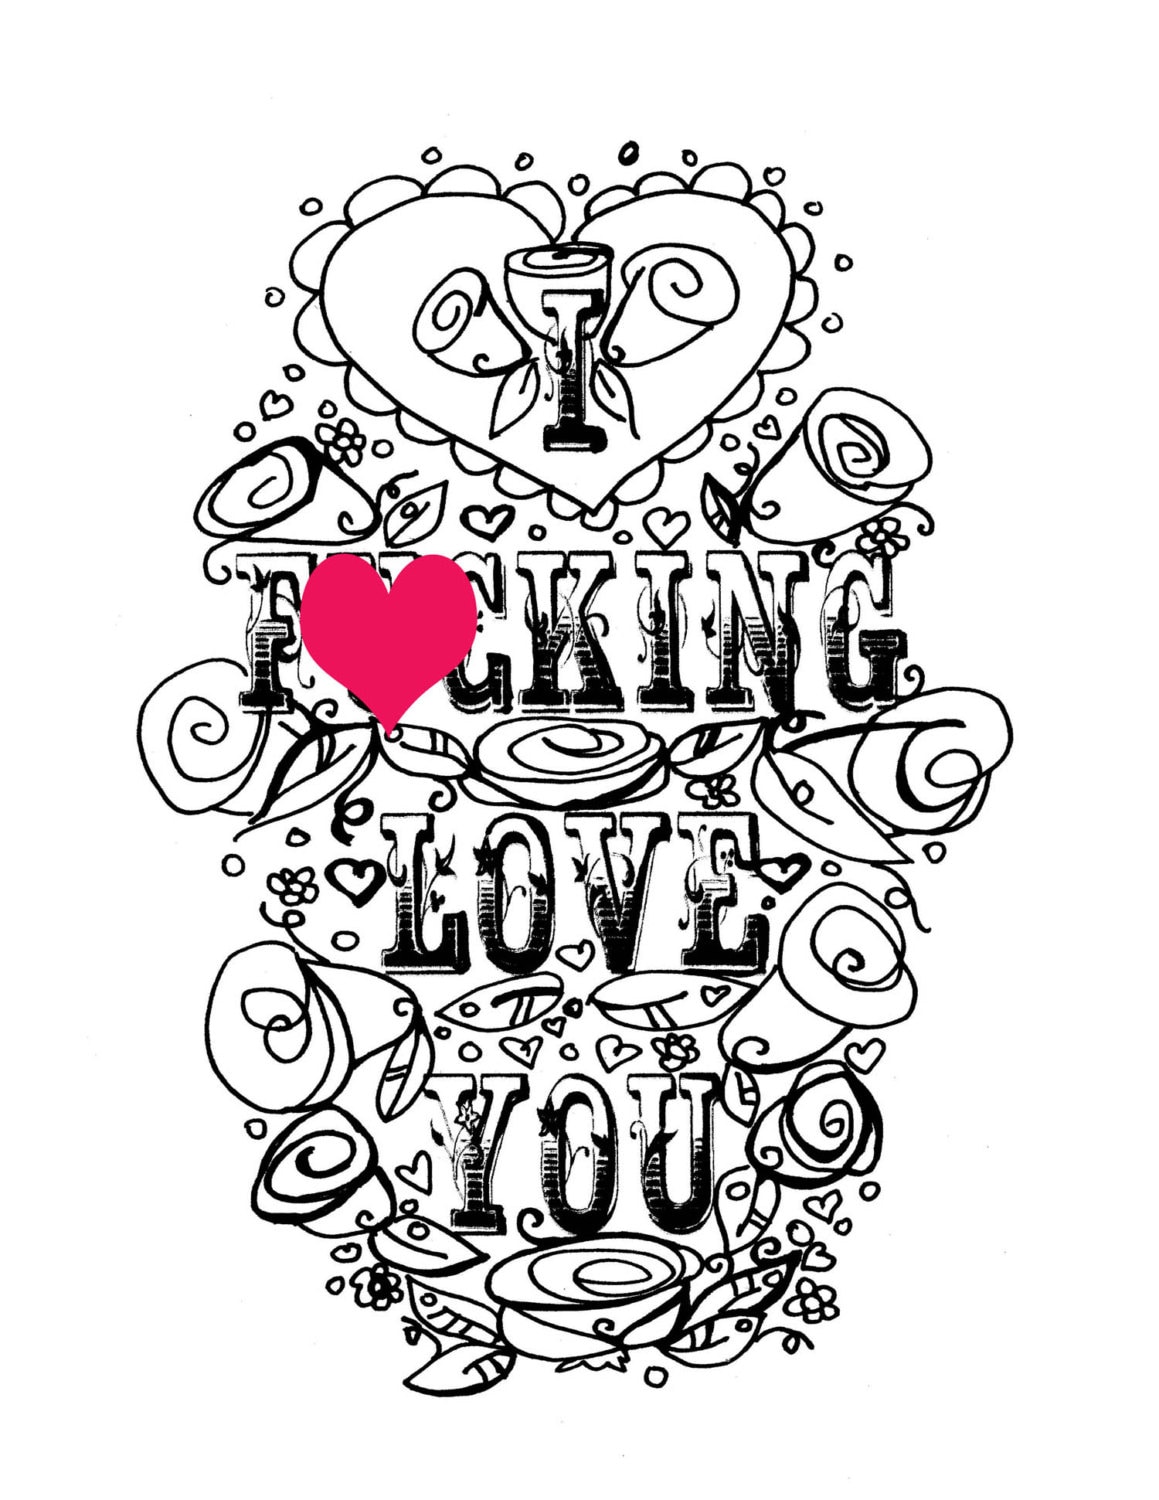 Adult coloring page valentines day curse swear sheet i fcking love you anniversary funny i love you diy sweary love printable